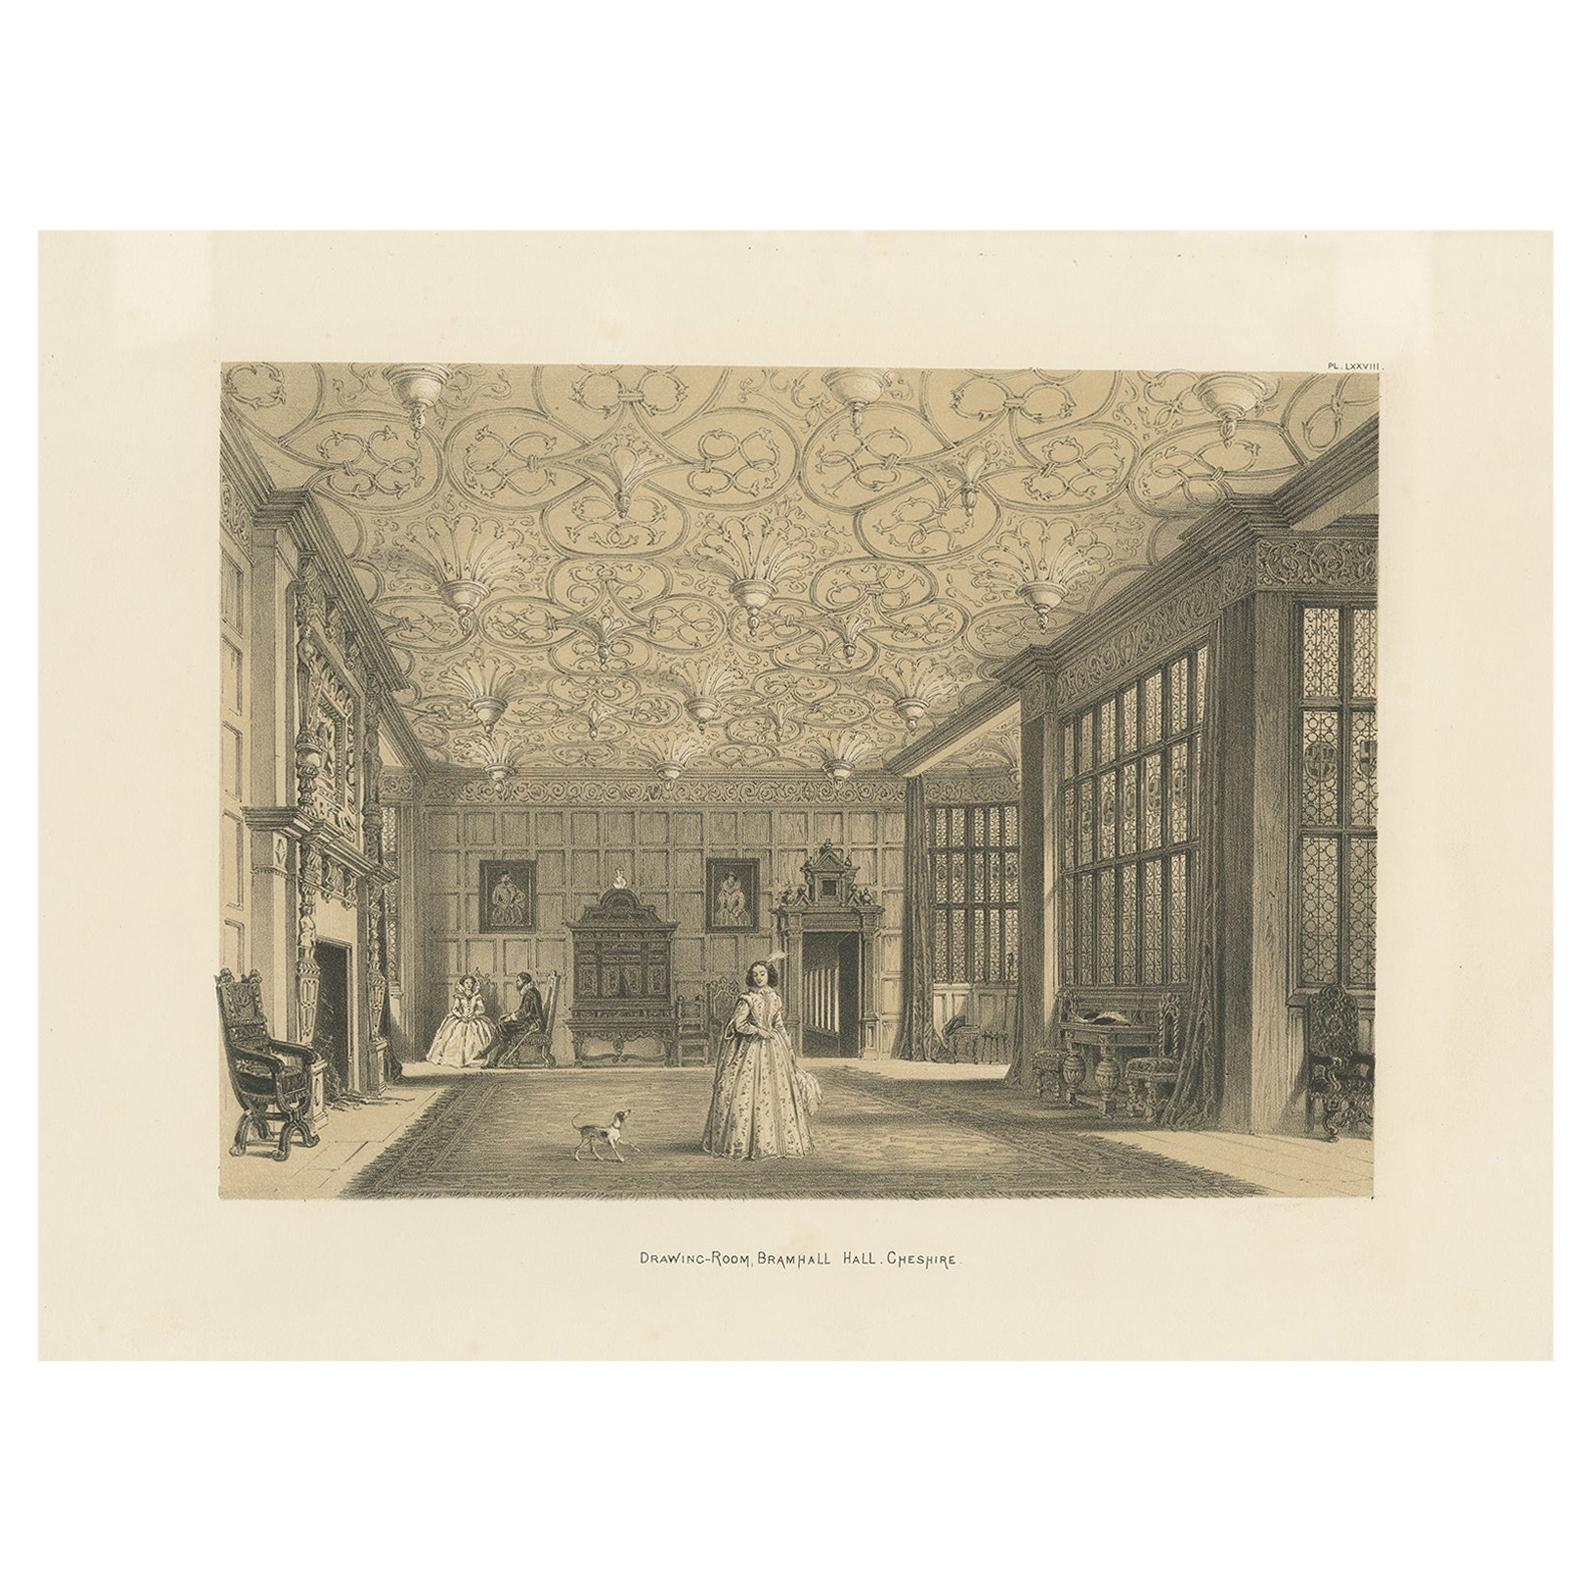 Antique Print of the Drawing Room of Bramhall Hall by Nash, circa 1870